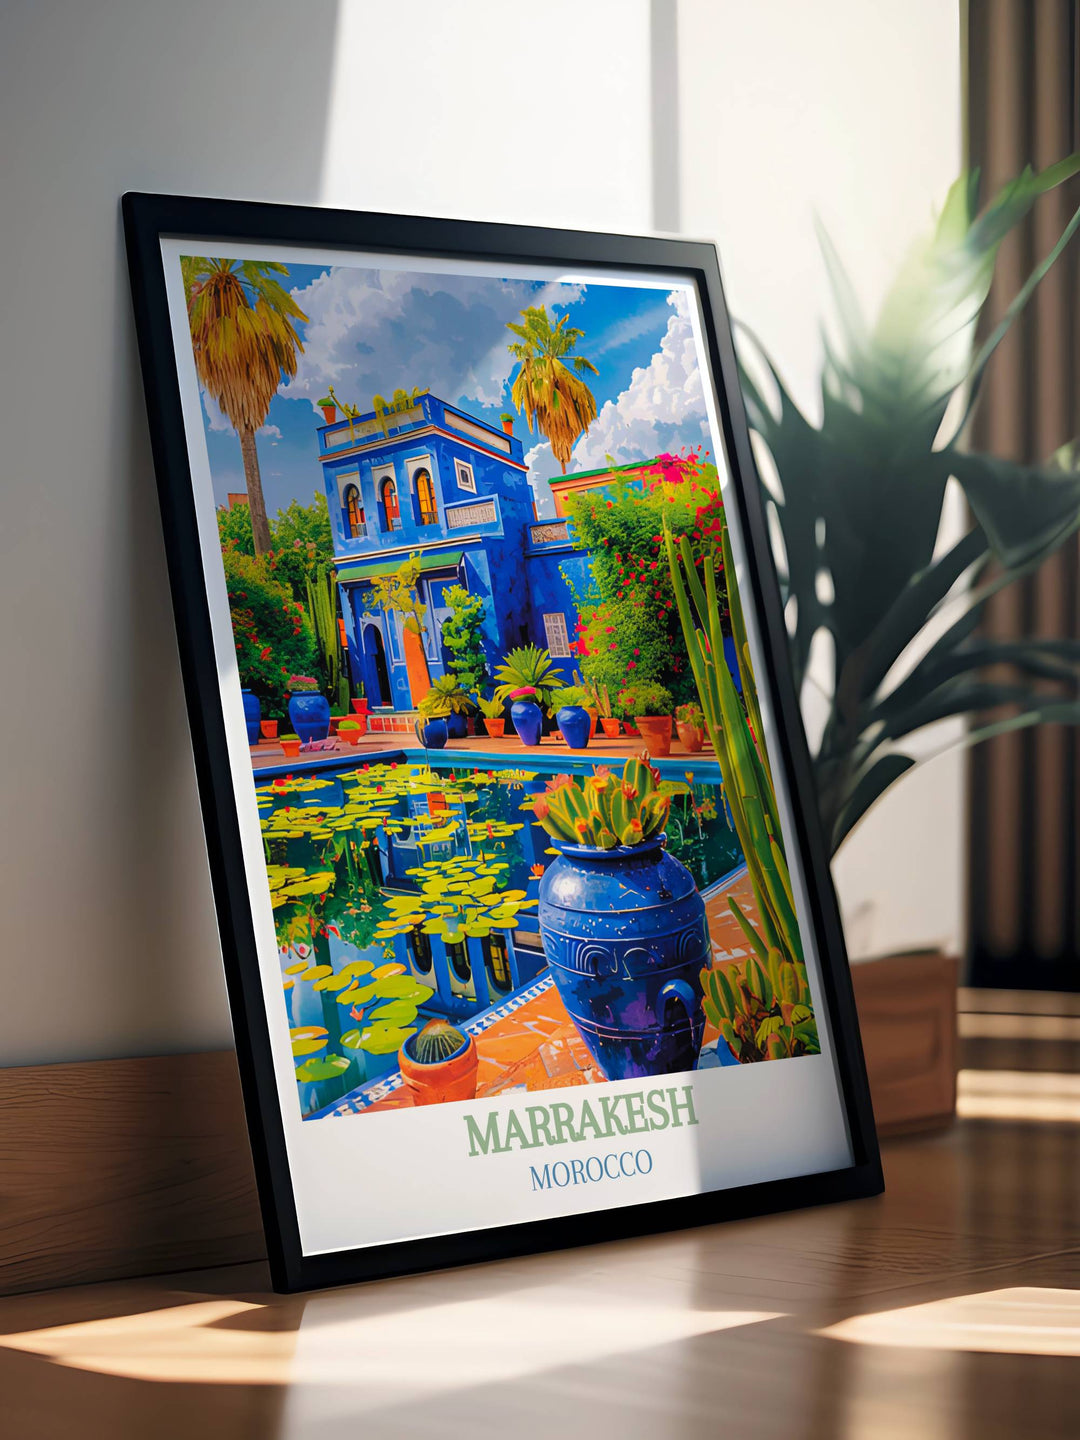 Artistic representation of Majorelle Garden with a focus on the textured pathways and rich, floral diversity that characterizes the famous Moroccan garden.